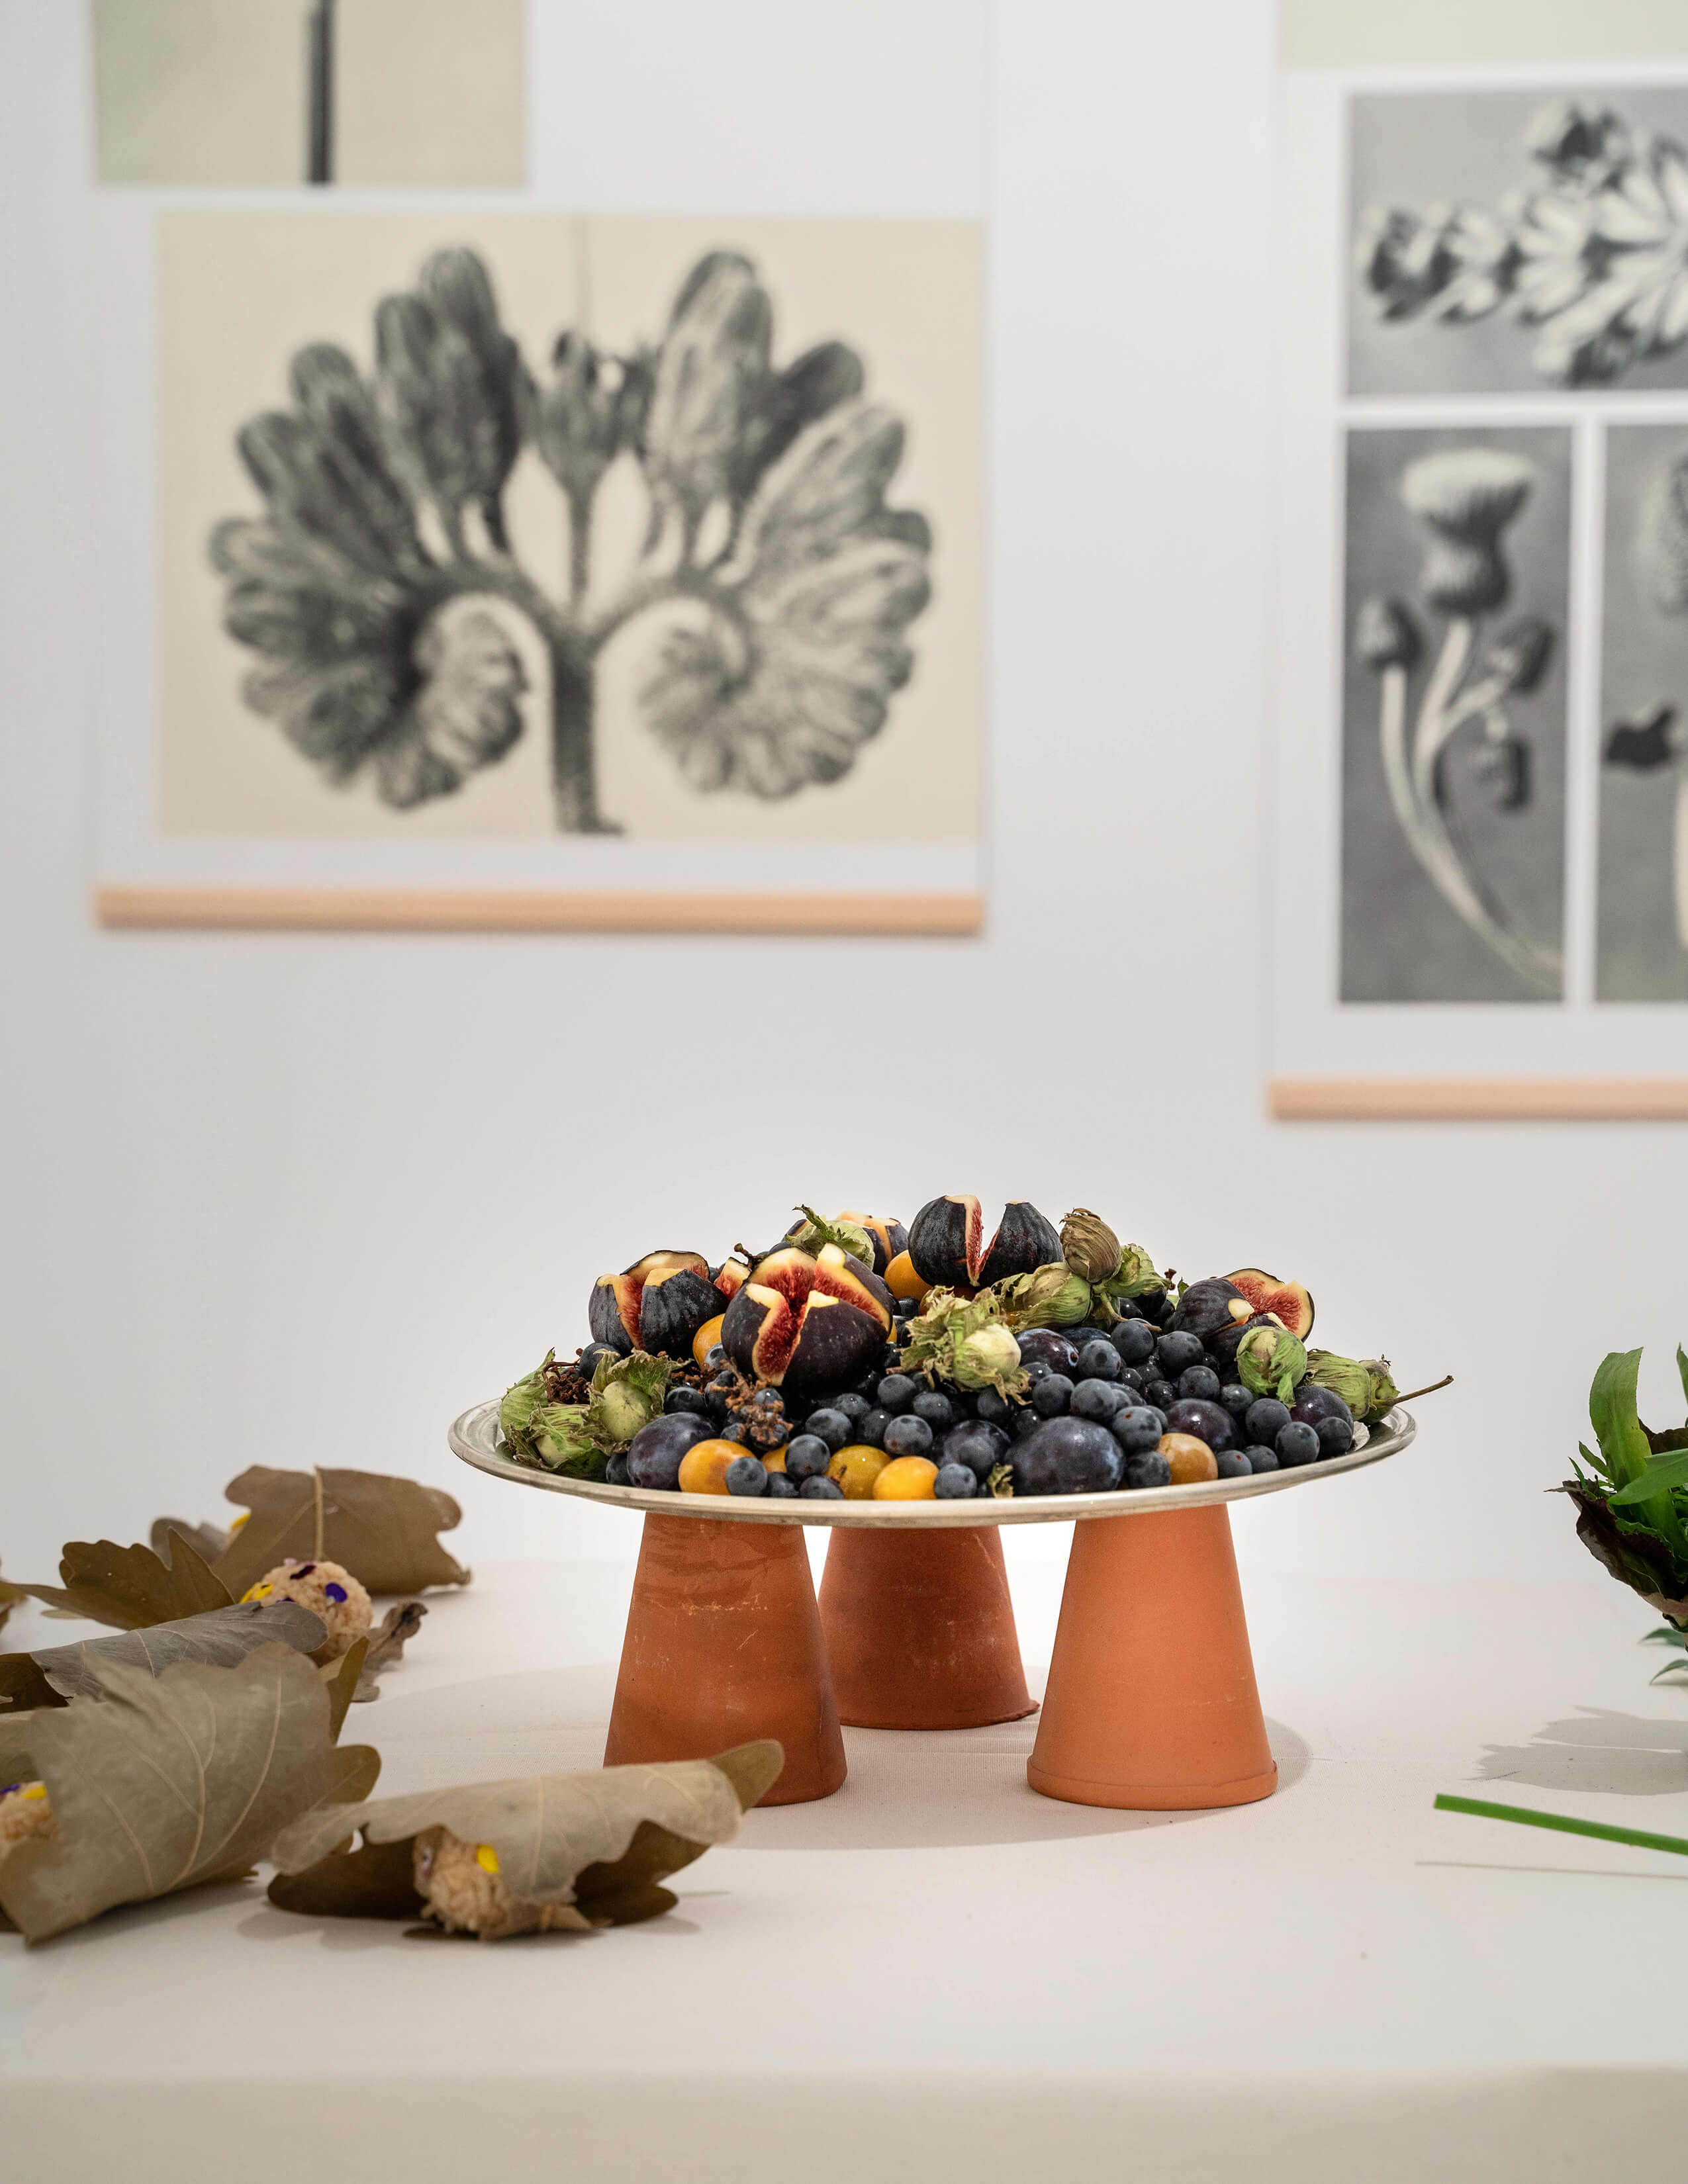 A plate of fruits is displayed next to a few bunches of food that were served with leaves and there are some black and white paintings hung on the wall.